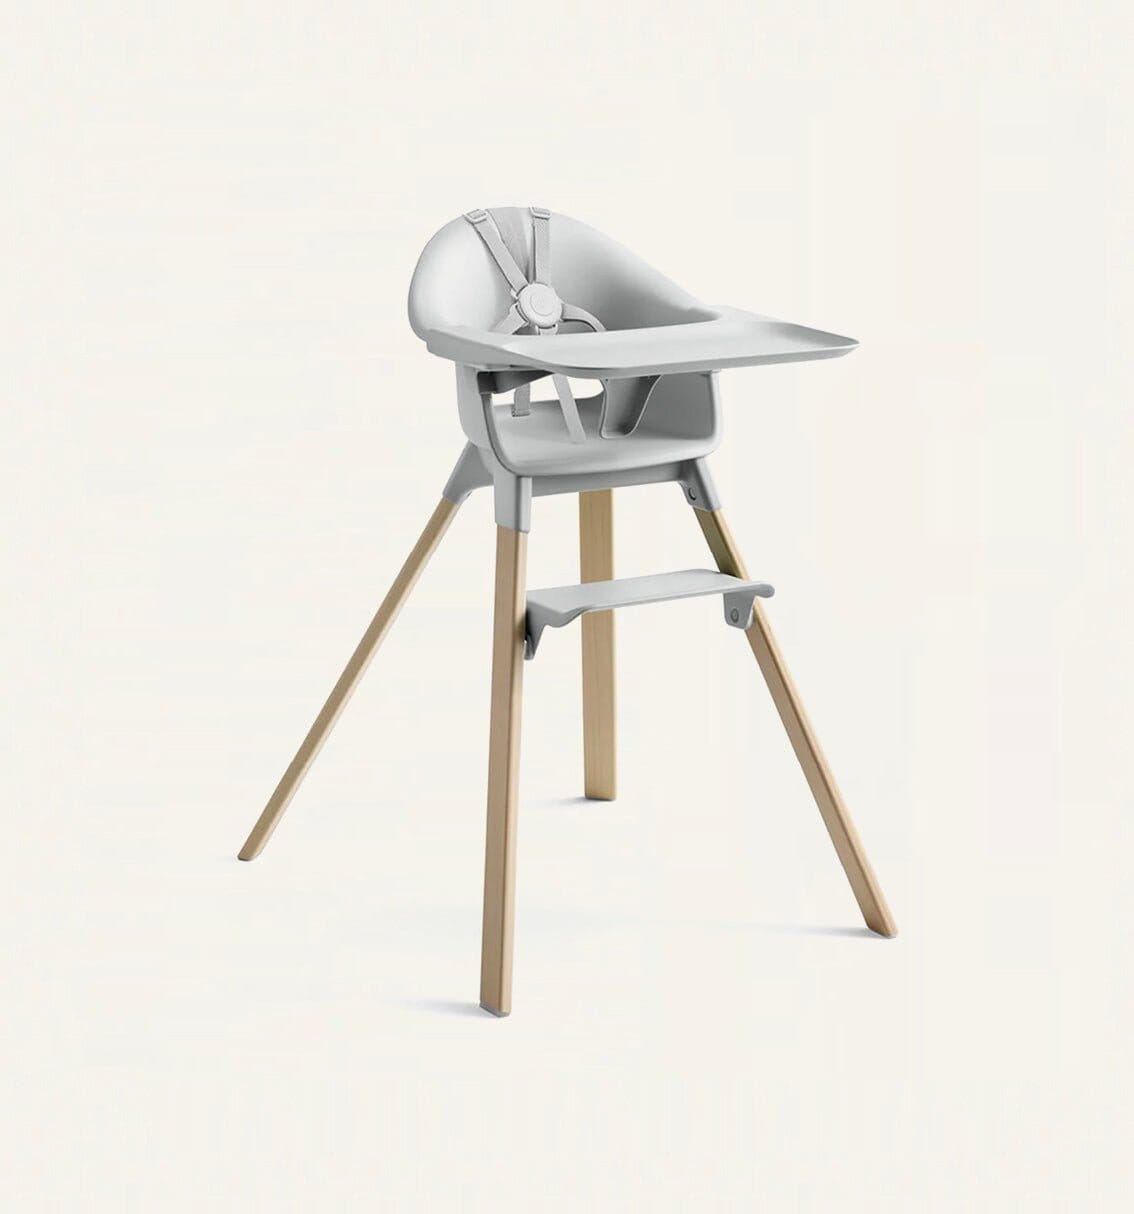 Rent the Stokke Clikk High Chair for just £11 per month.